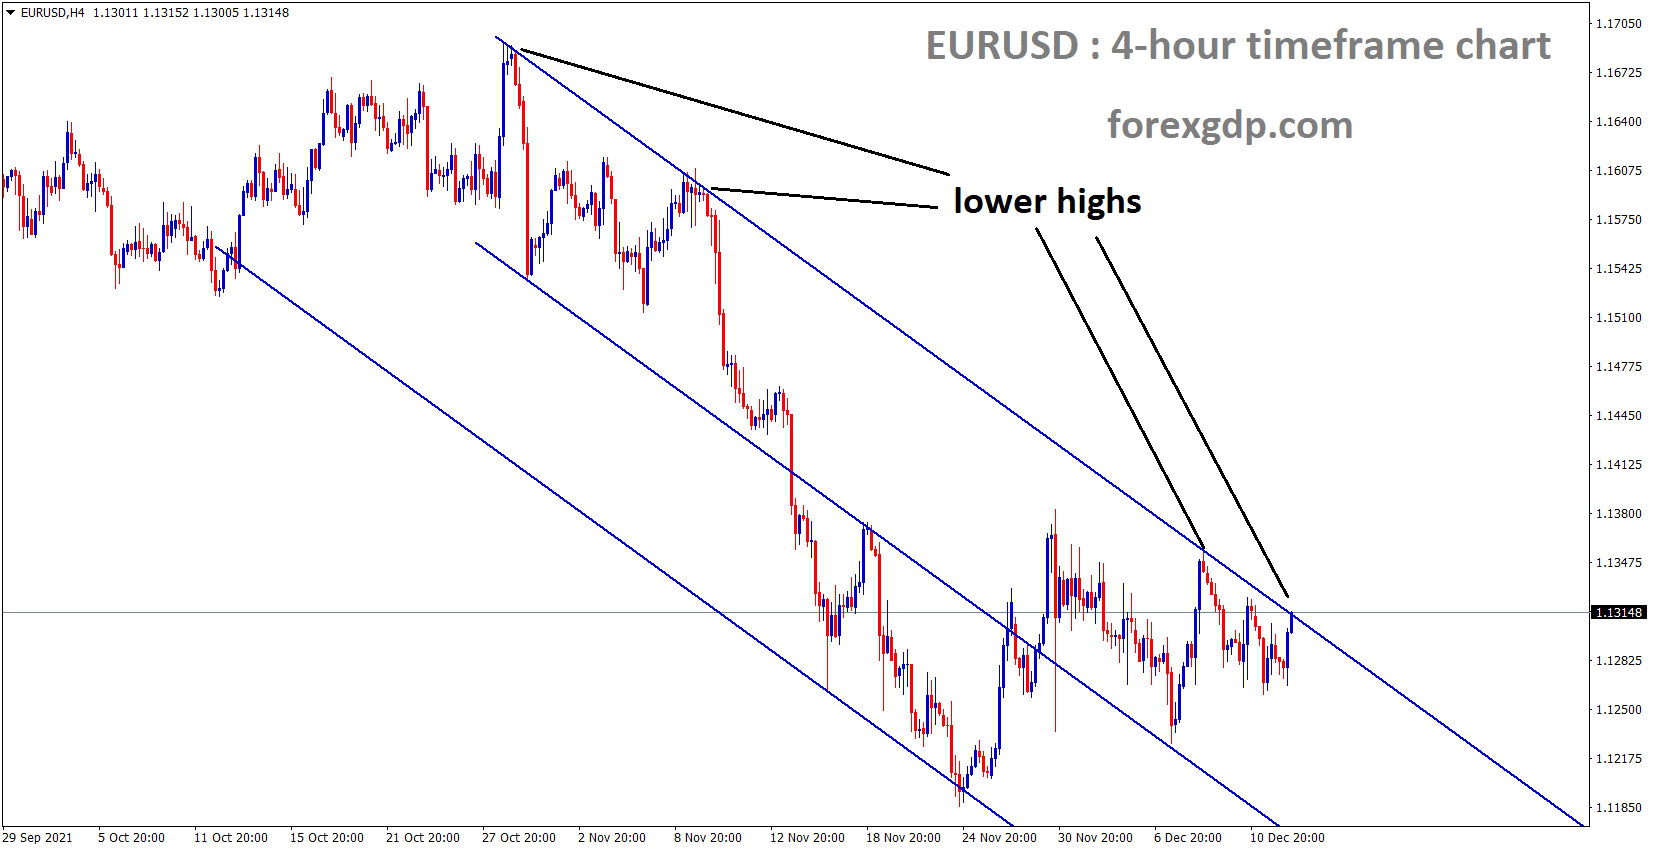 EURUSD is moving in the Descending channel and the market reached the lower high area of the channel 1